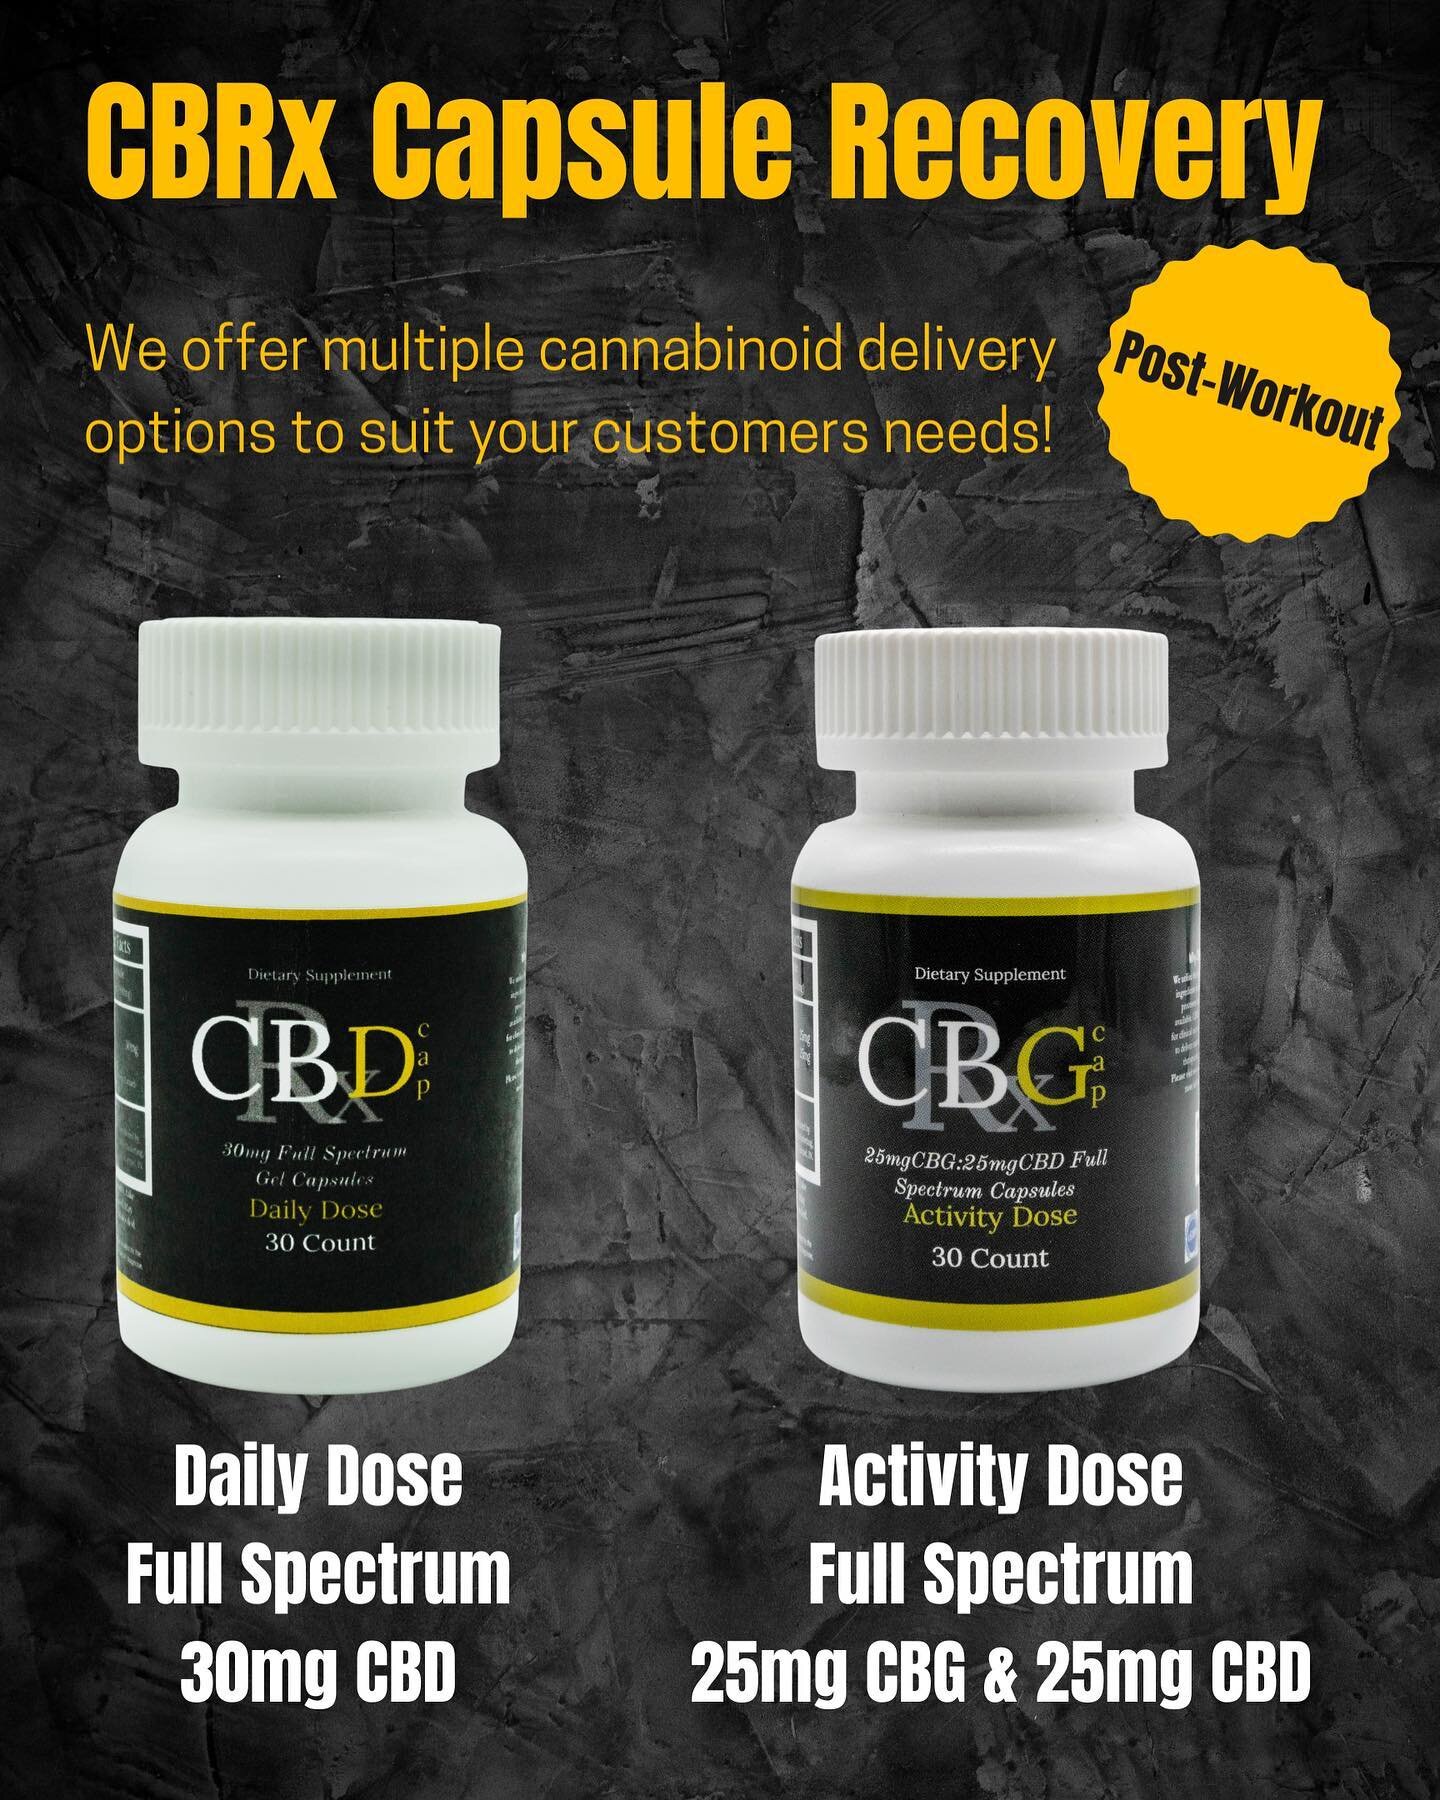 ATTENTION‼️ Are you ready to get back into the gym FASTER &amp; STRONGER after workouts⁉️ Look no further than our capsule post-workout recovery 🏋️

🔺 Daily Dose 🔺
Full Spectrum 30mg CBD (per capsule) - ALL the benefits of CBD in a tasteless capsu